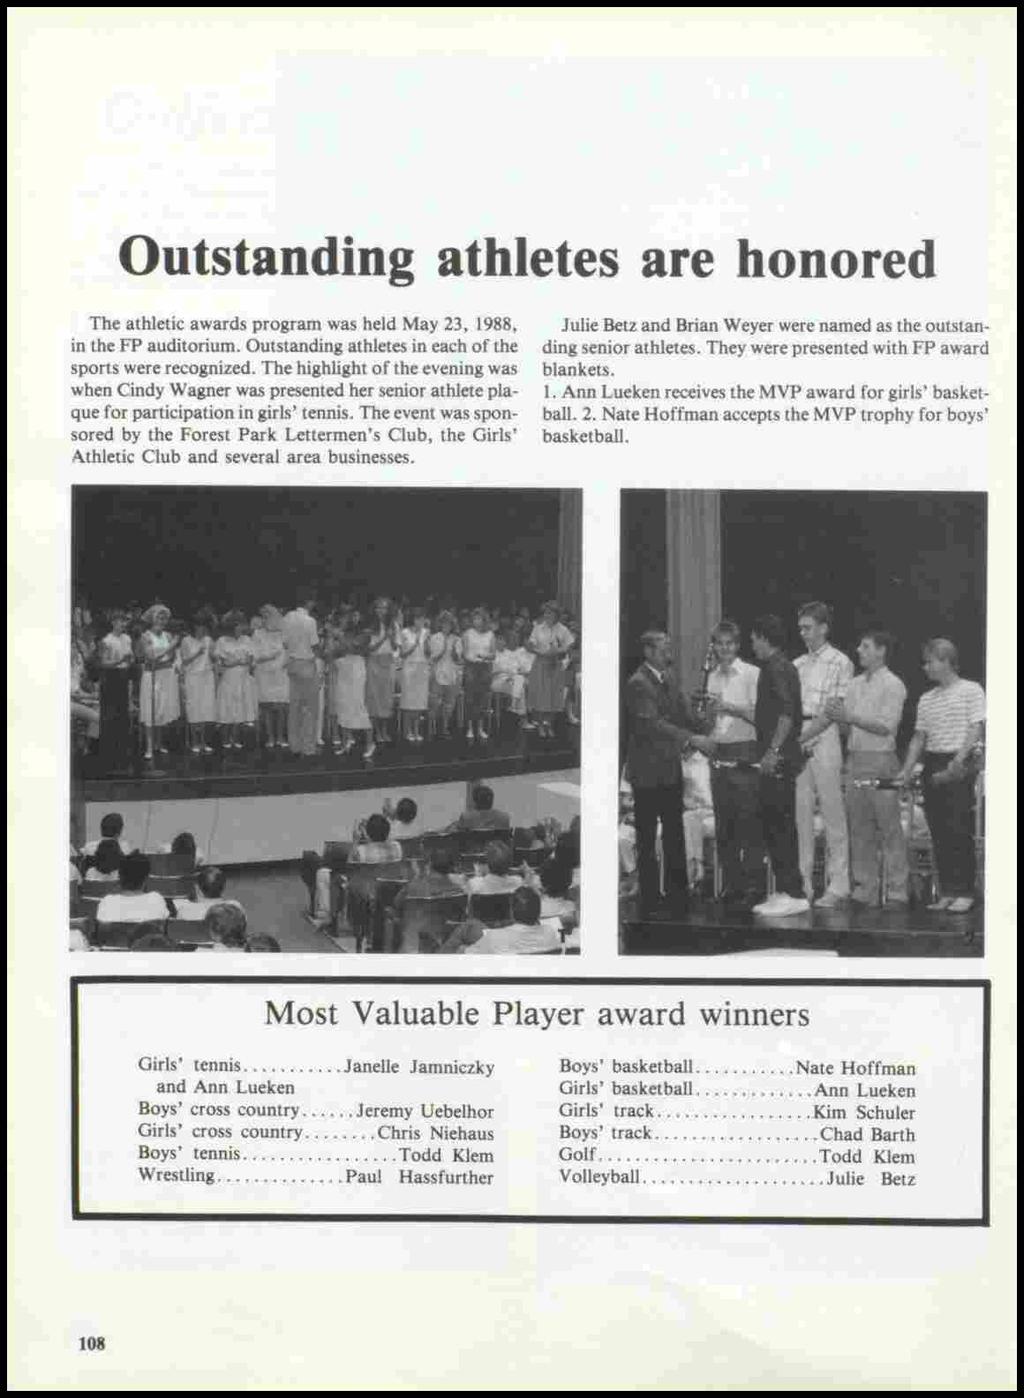 Outstanding athletes are honored The athletic awards program was held May 23, 1988, in the FP auditorium. Outstanding athletes in each of the sports were recognized.